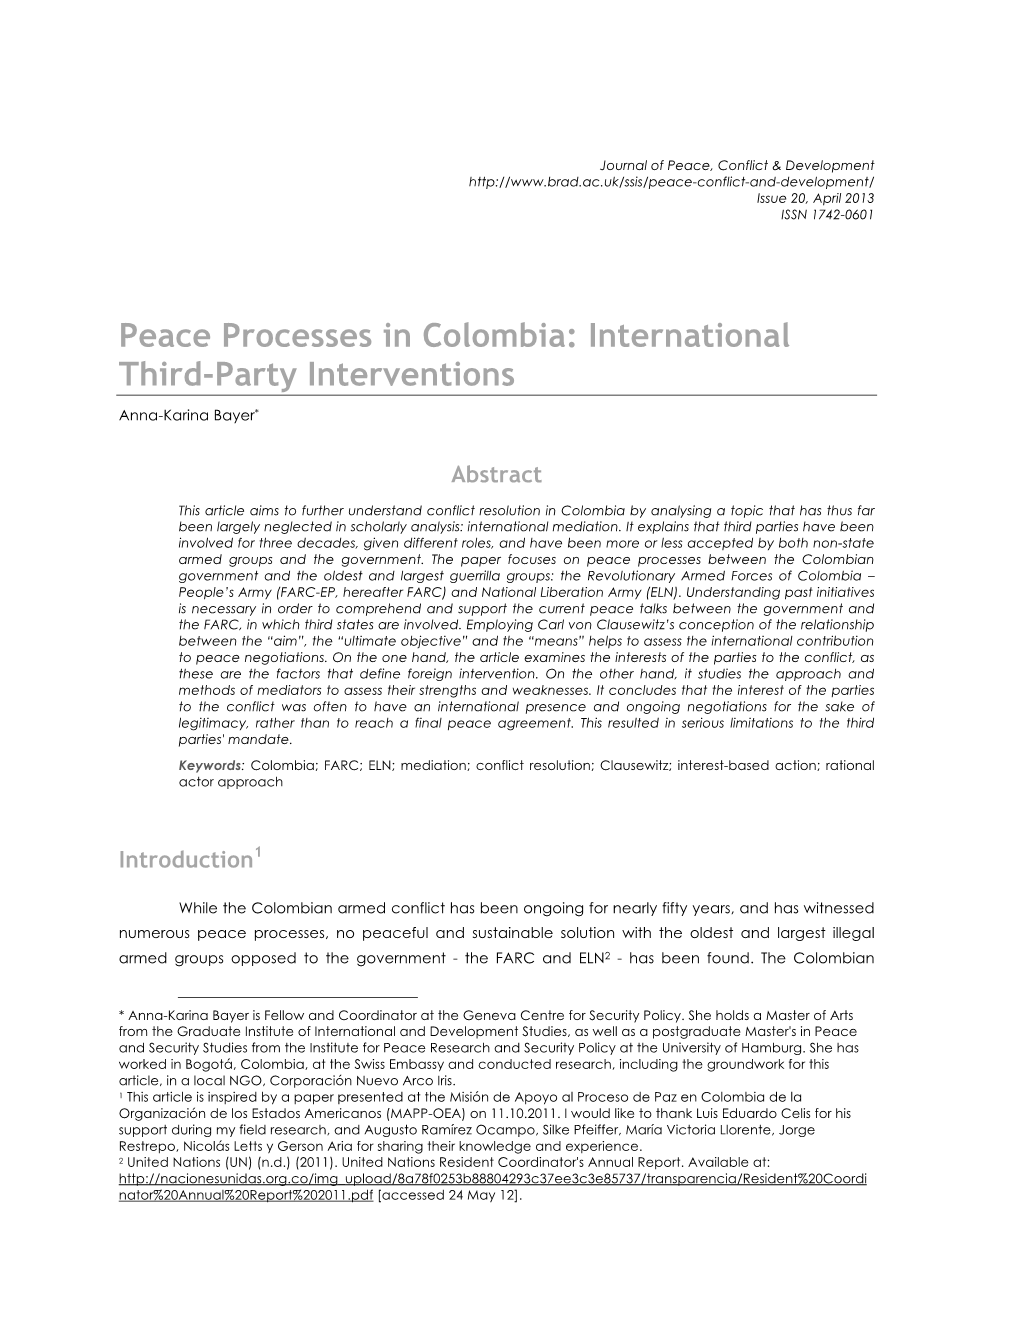 Download Peace Processes in Colombia